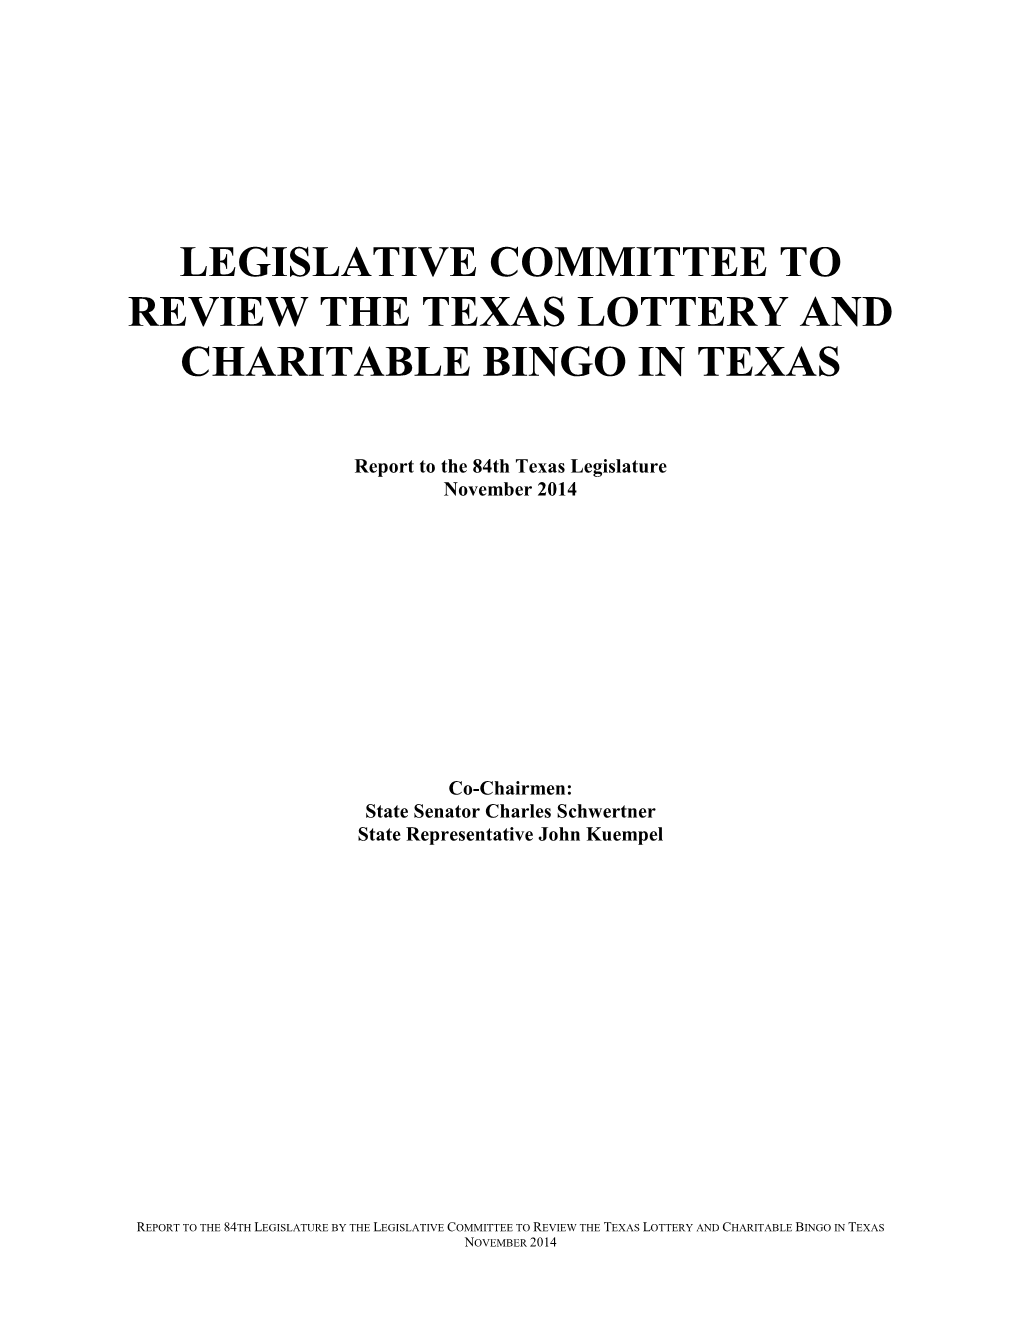 Legislative Committee to Review the Texas Lottery and Charitable Bingo in Texas